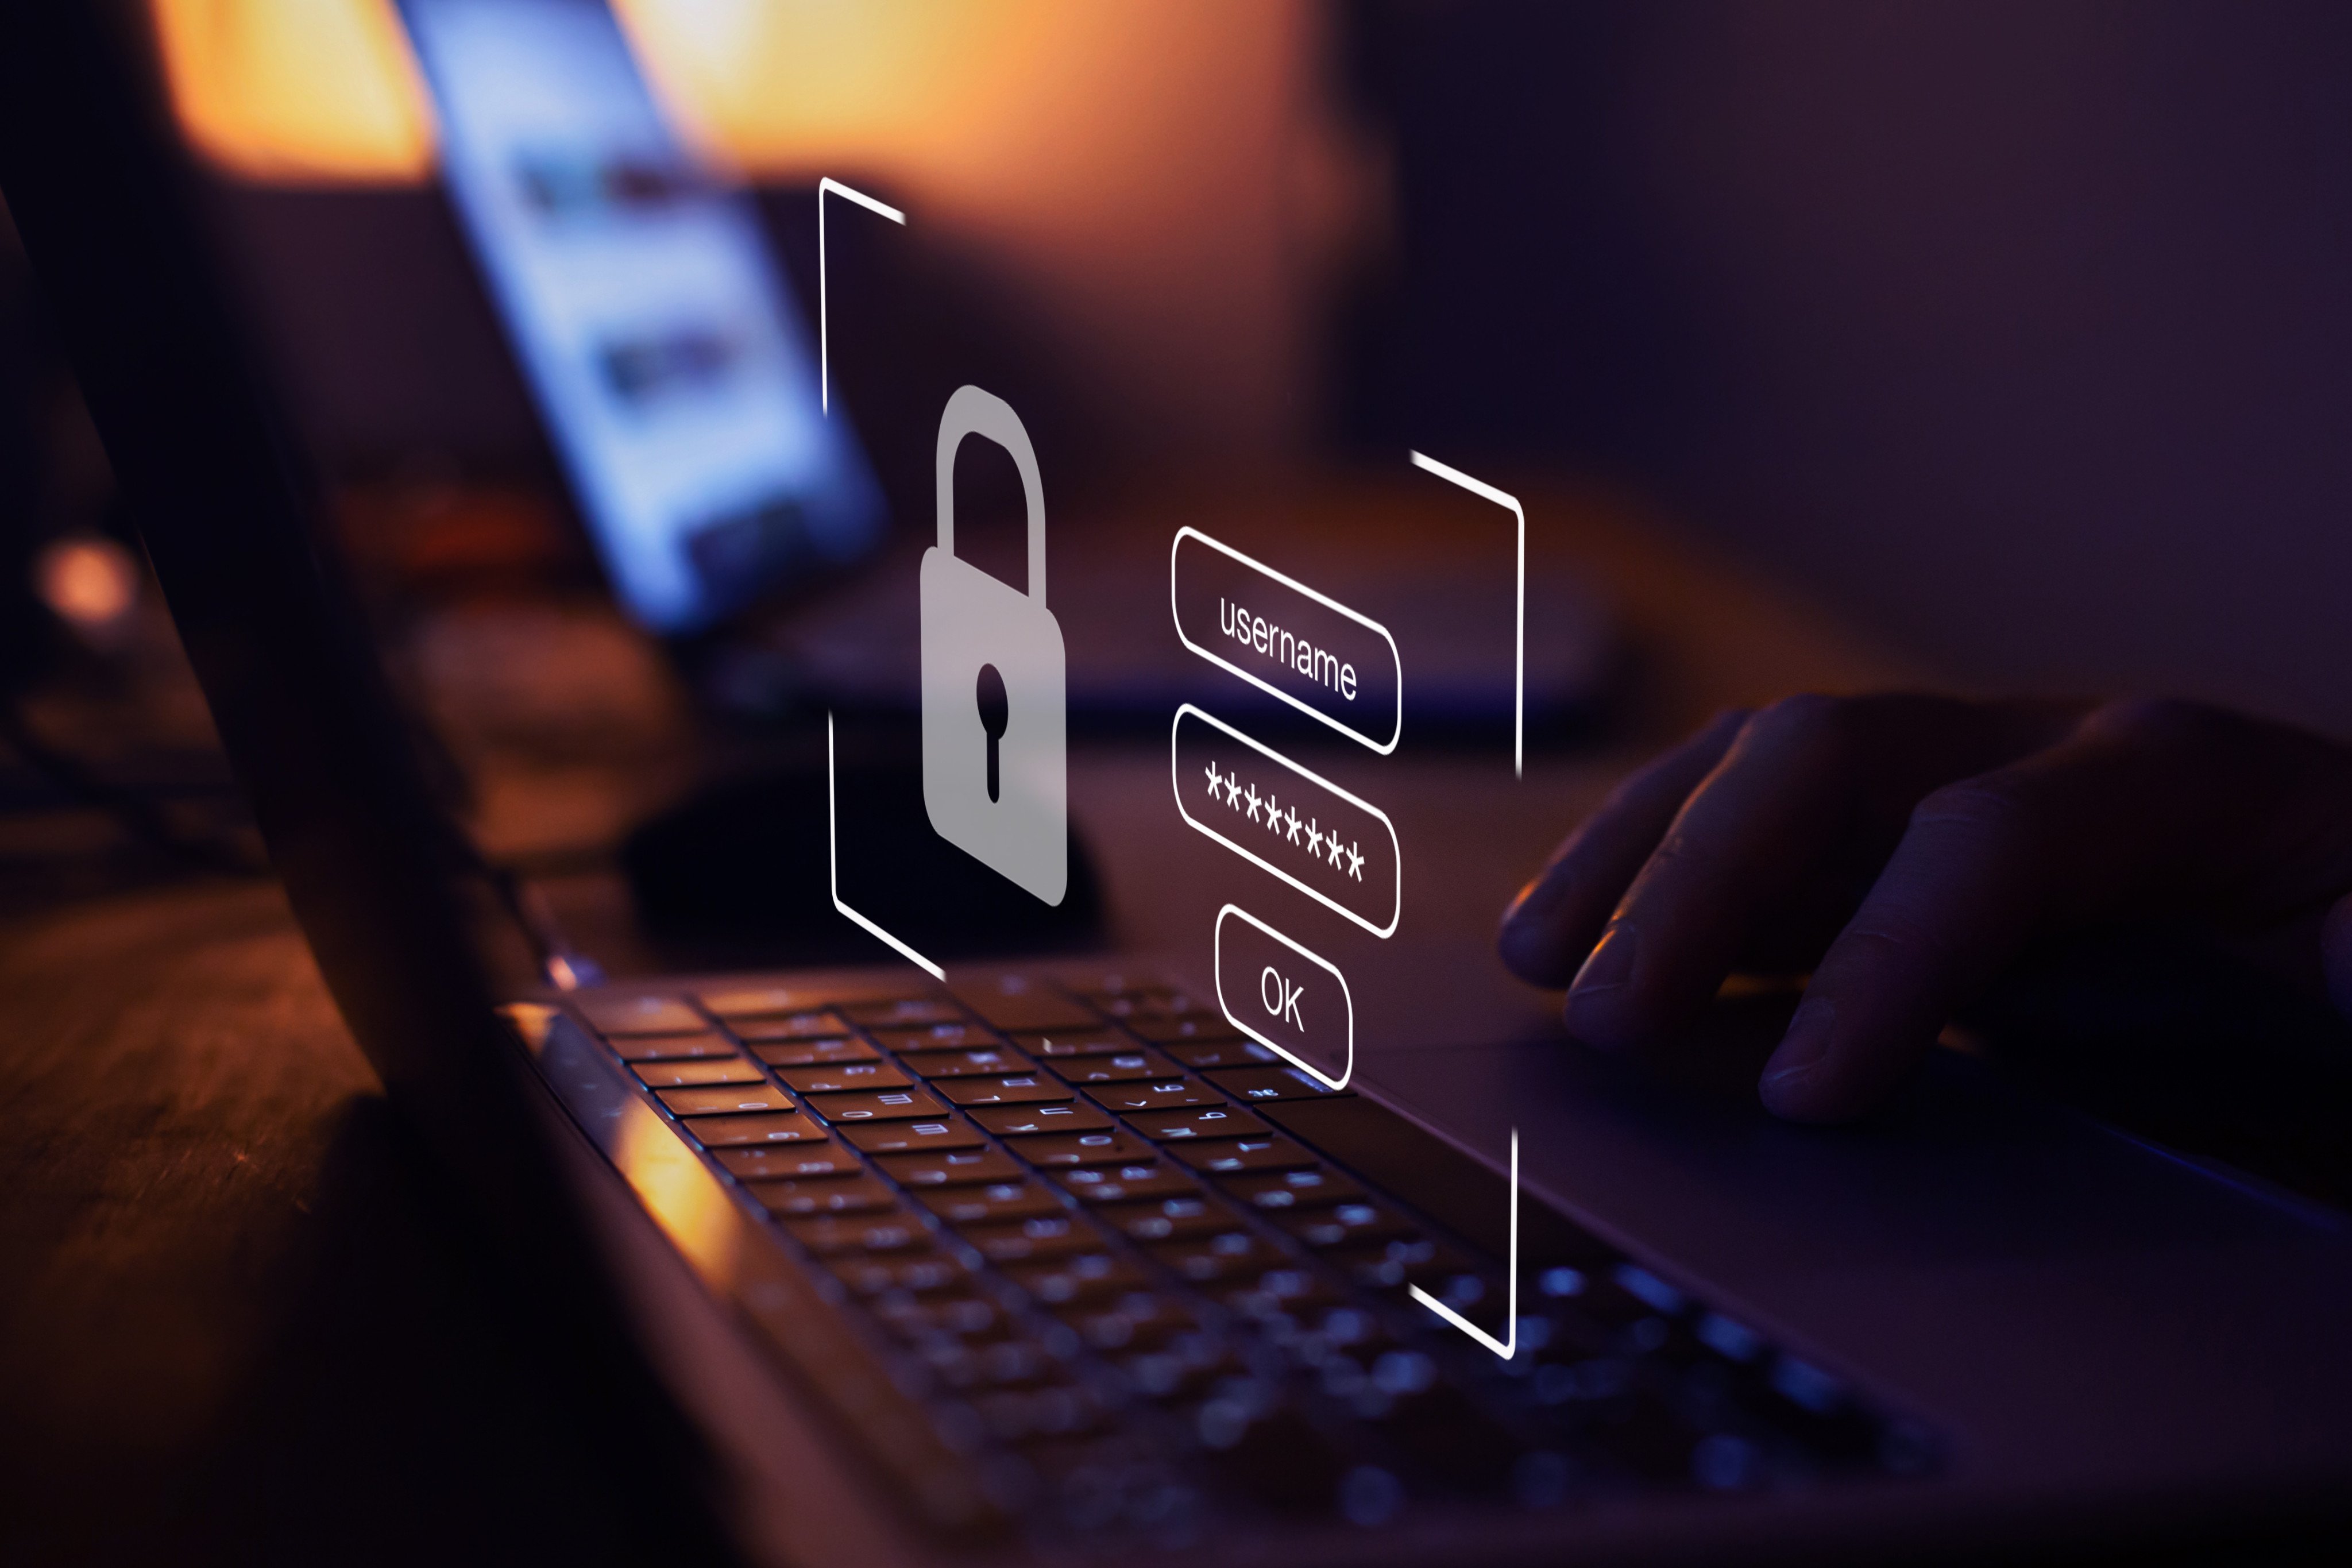 The advice from experts remains the same – keep computer software current, use strong passwords and two-factor authentication. Photo: Shutterstock